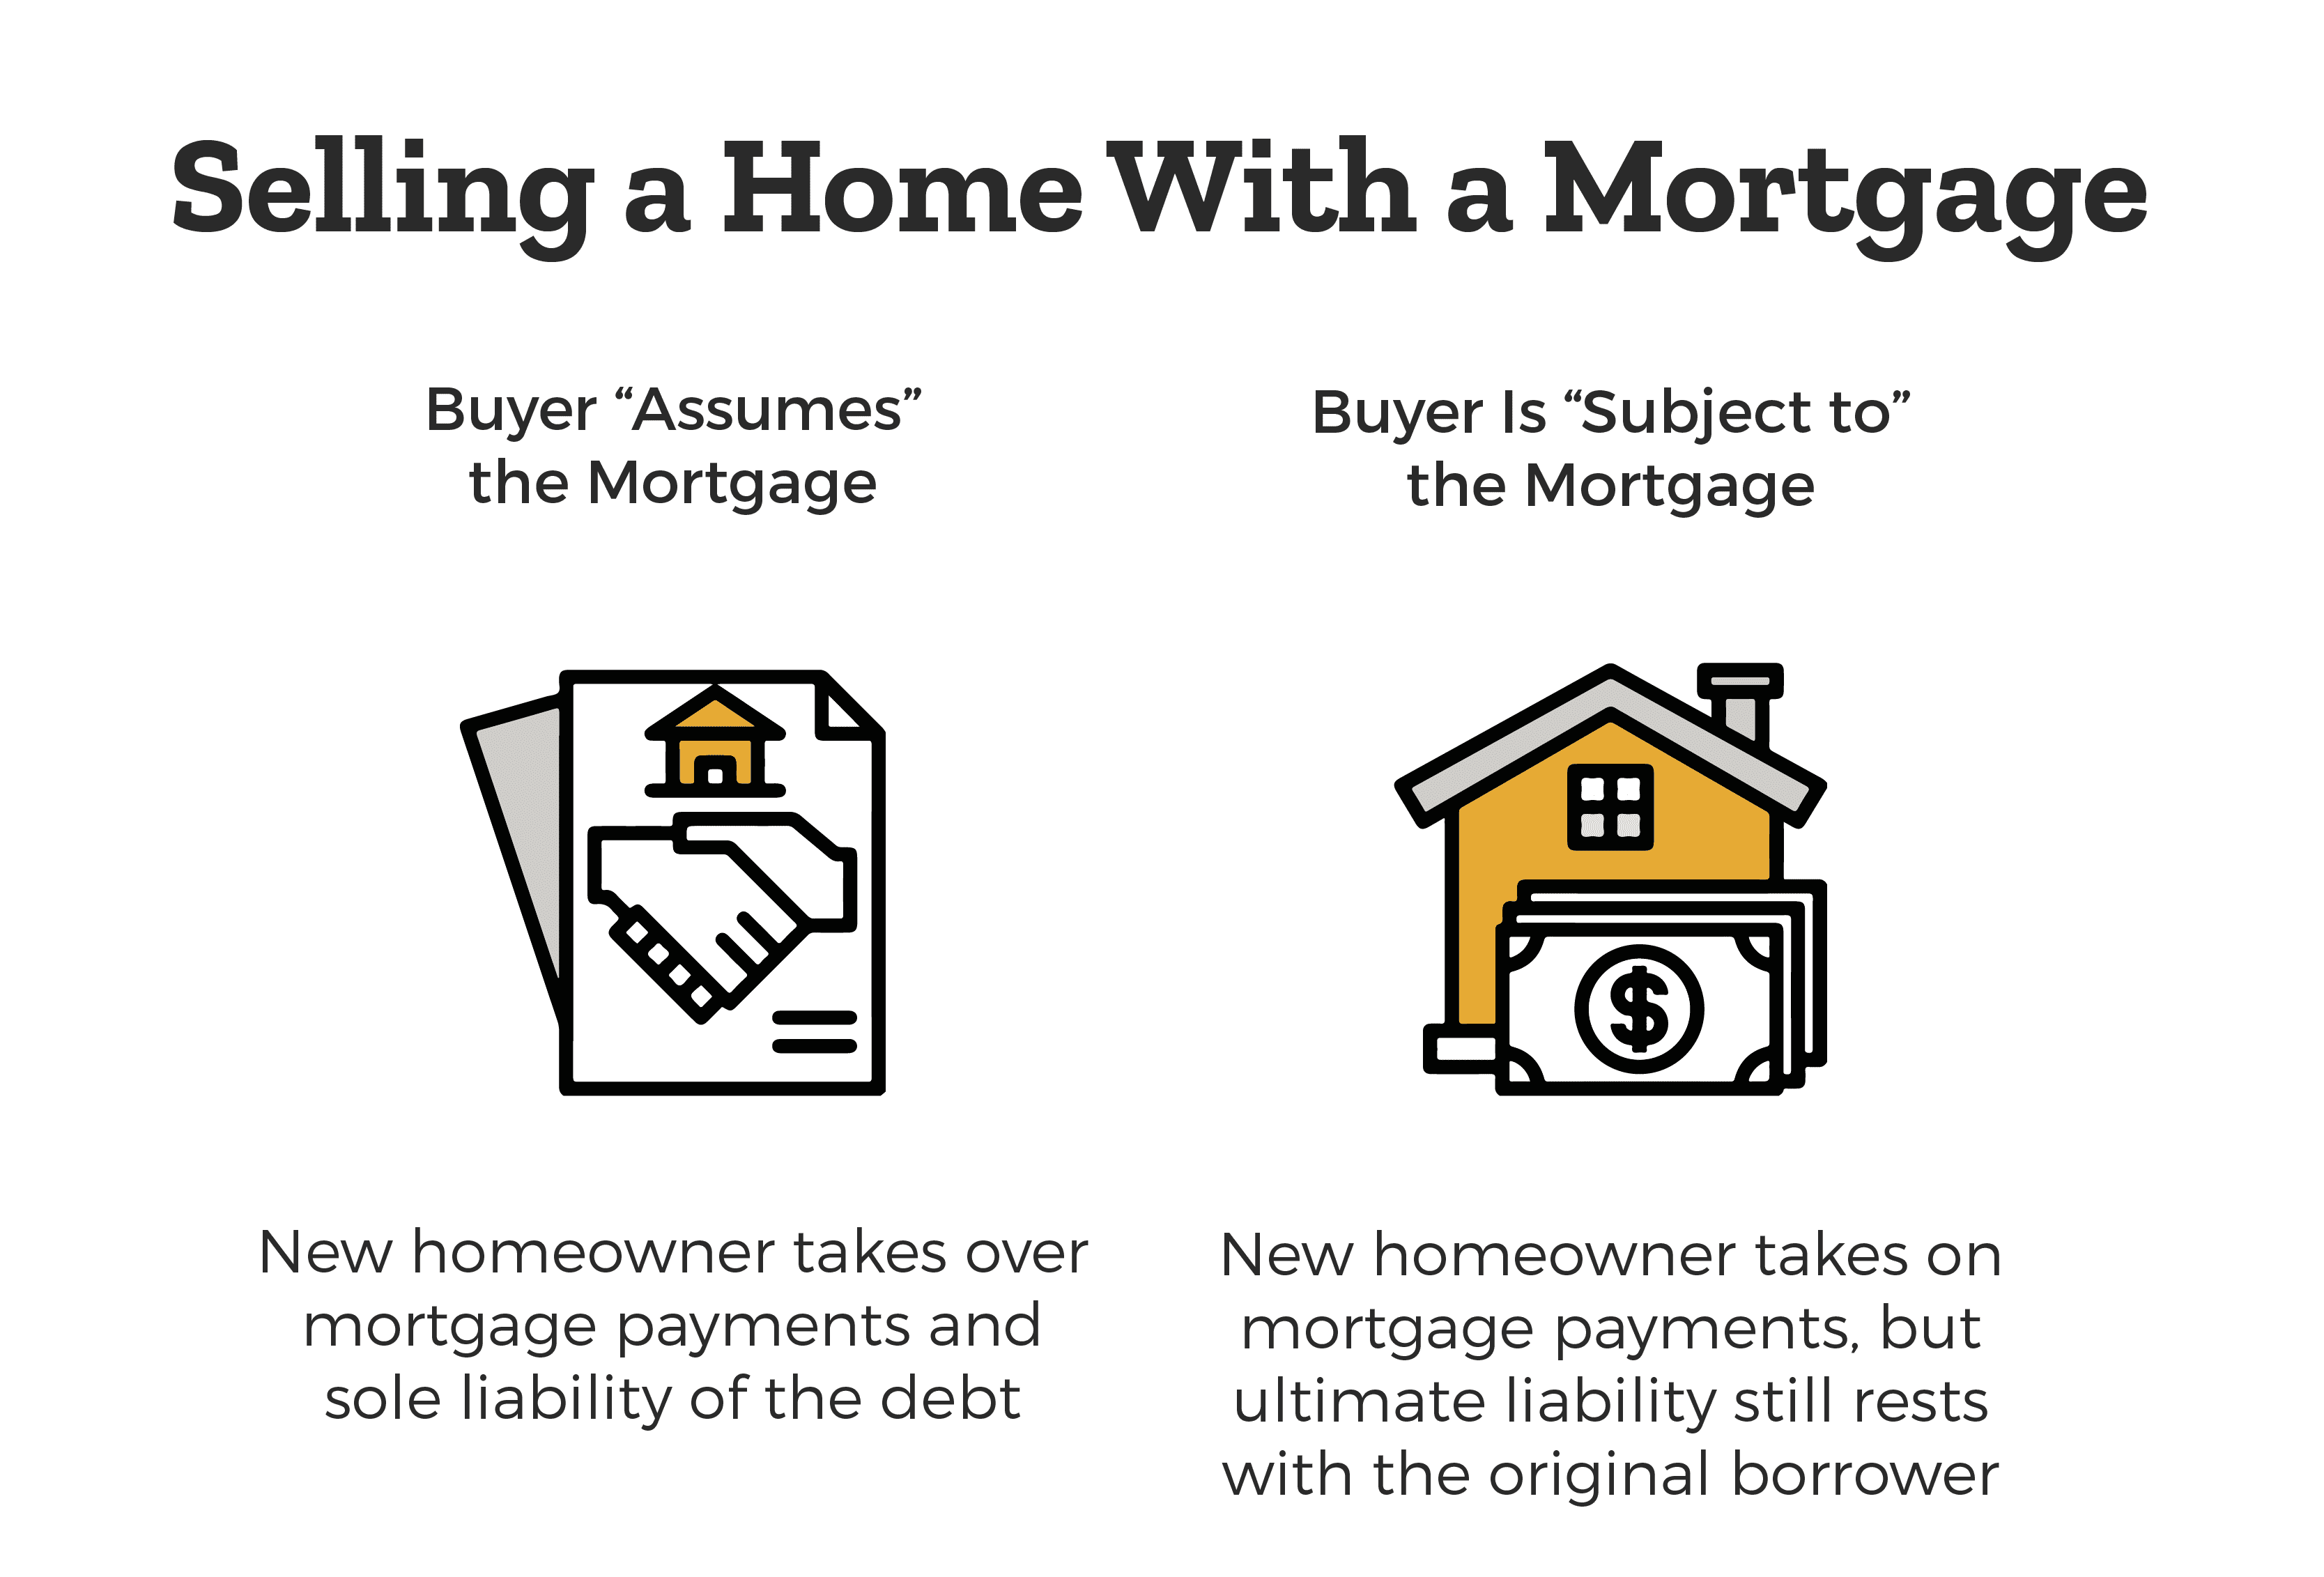 How Selling a Home With a Mortgage Works in Florida - There are two types illustrated. Buyer assumes the mortgage meaning the new homeowner takes over mortgage payments and sole liability of the debt. Buyer is subject to the mortgage meaning the new homeowner takes on mortgage payments, but ultimate liability still rests with the original borrower.